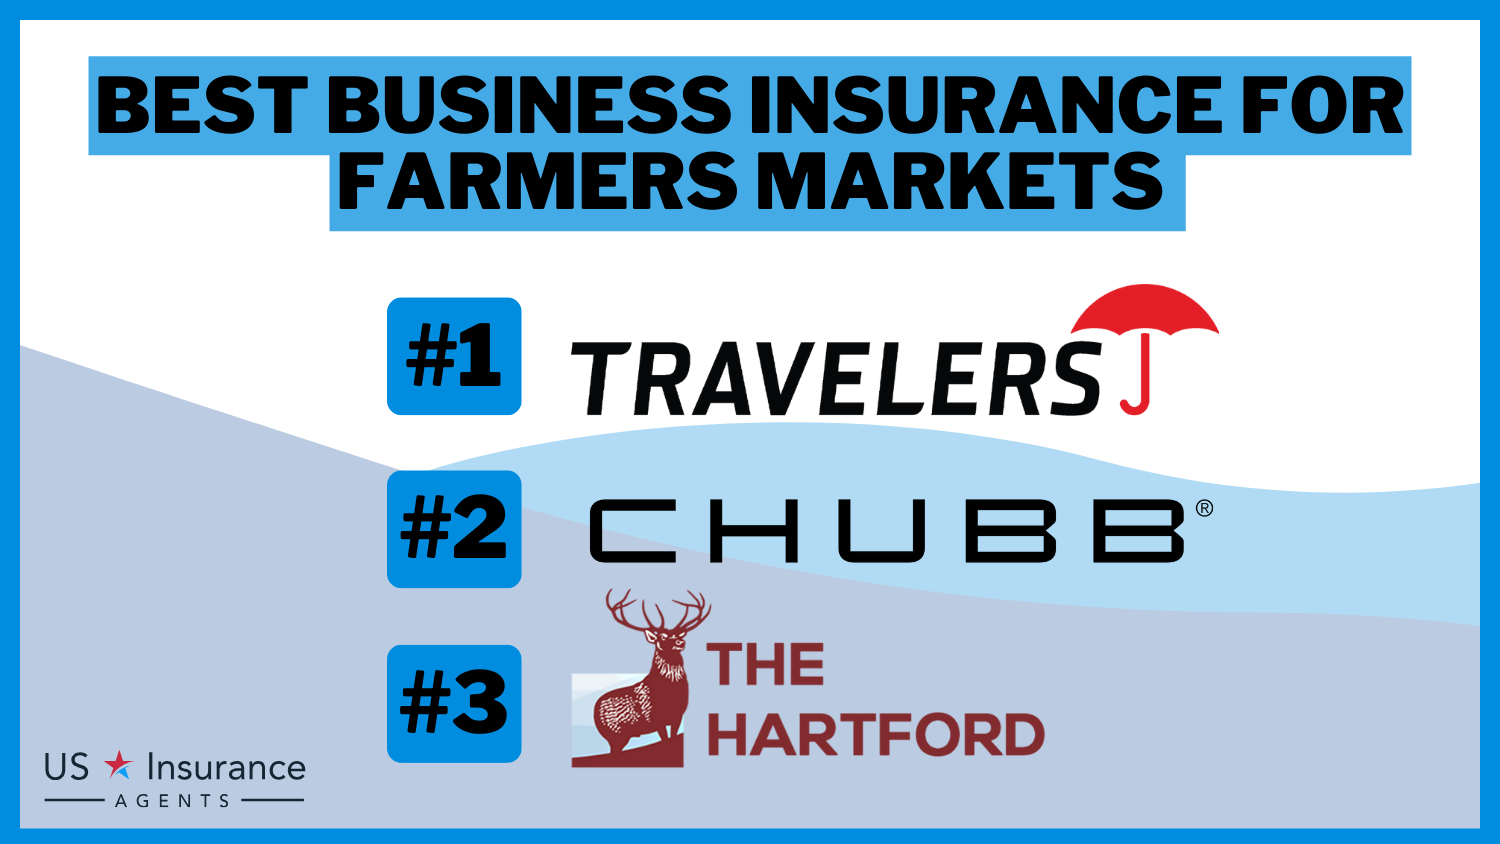 Travelers, CHUBB and The Hartford: Best Business Insurance for Farmers Markets